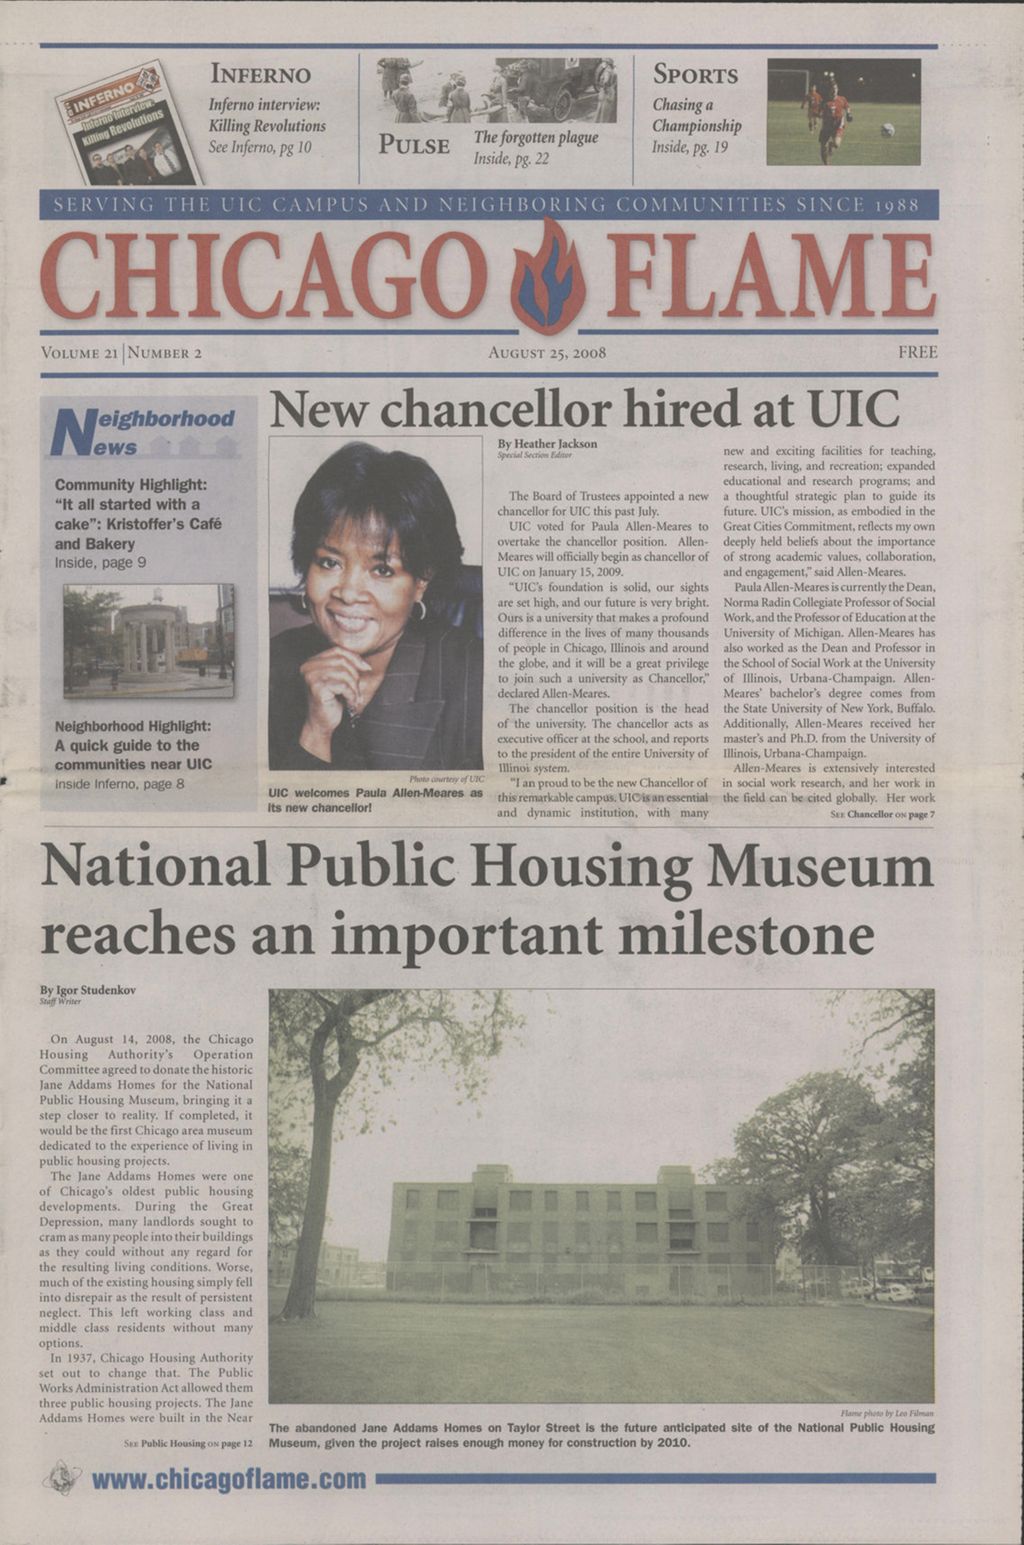 Chicago Flame (August 25, 2008)